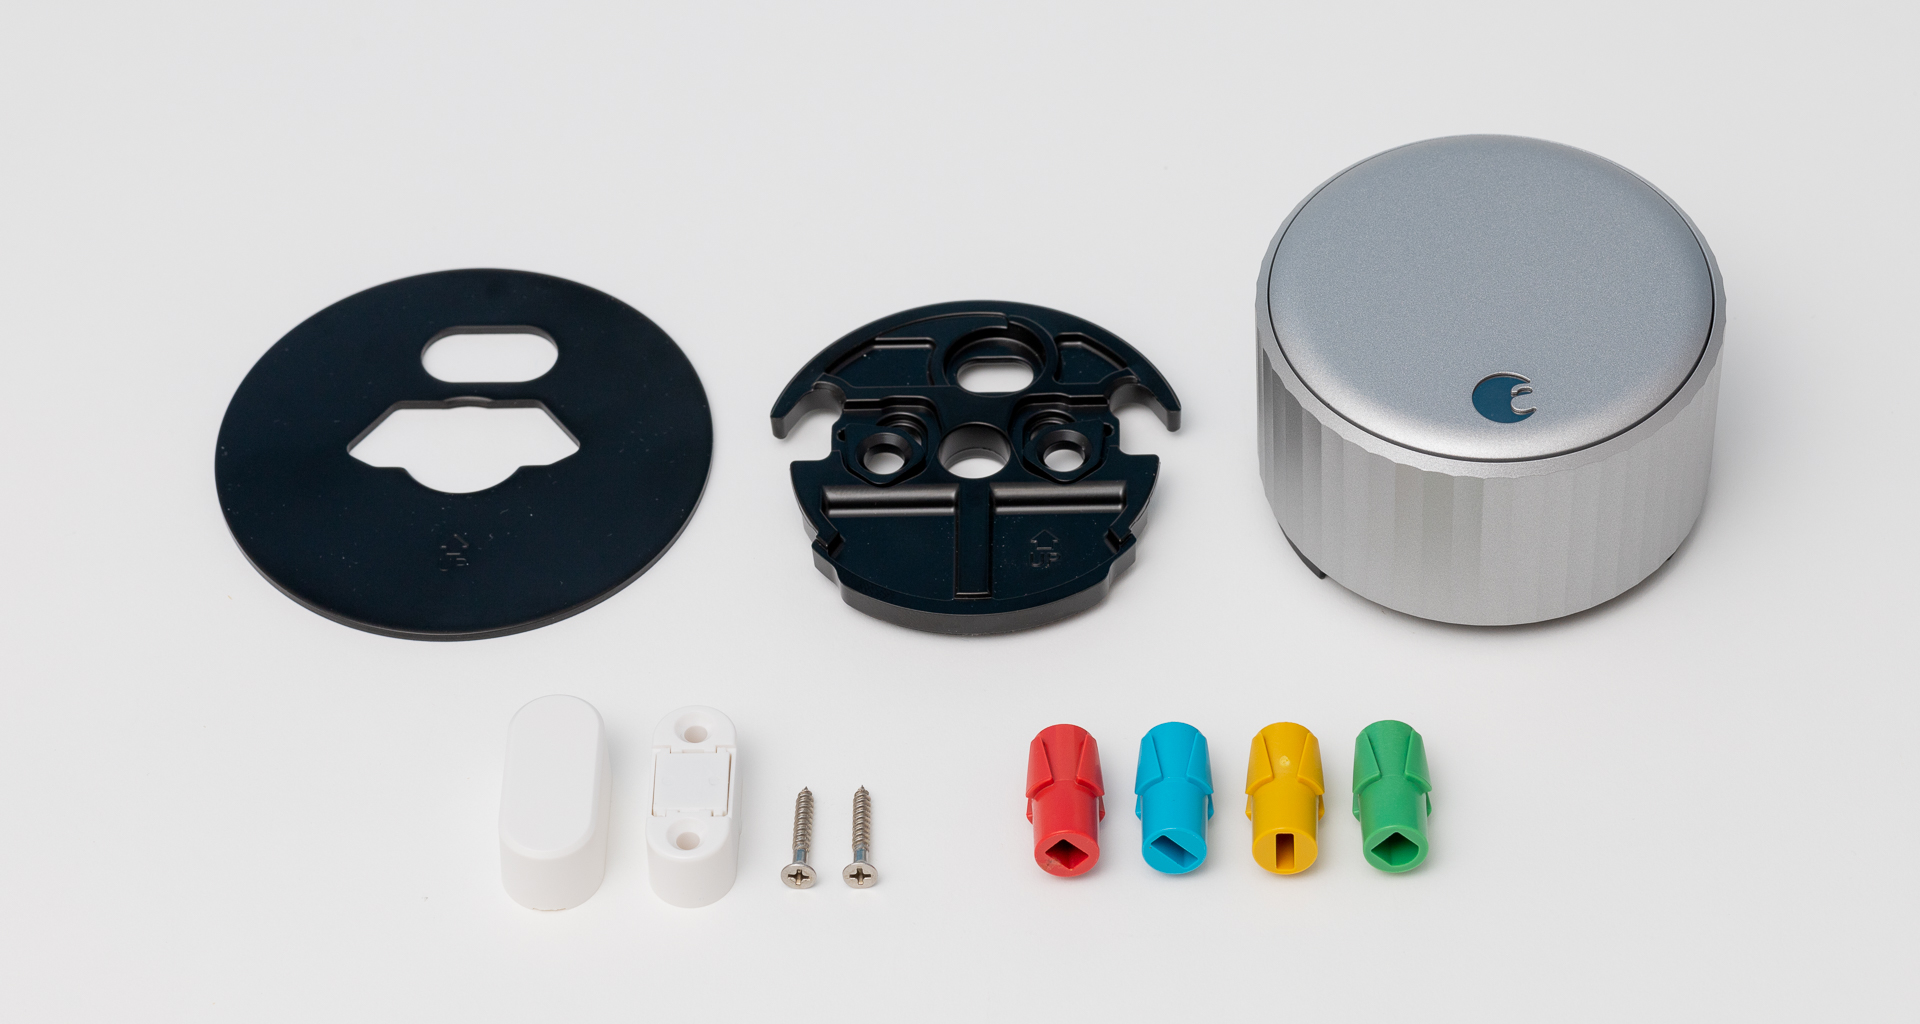 The August Wi-Fi Smart Lock components. Image: Digitized House.